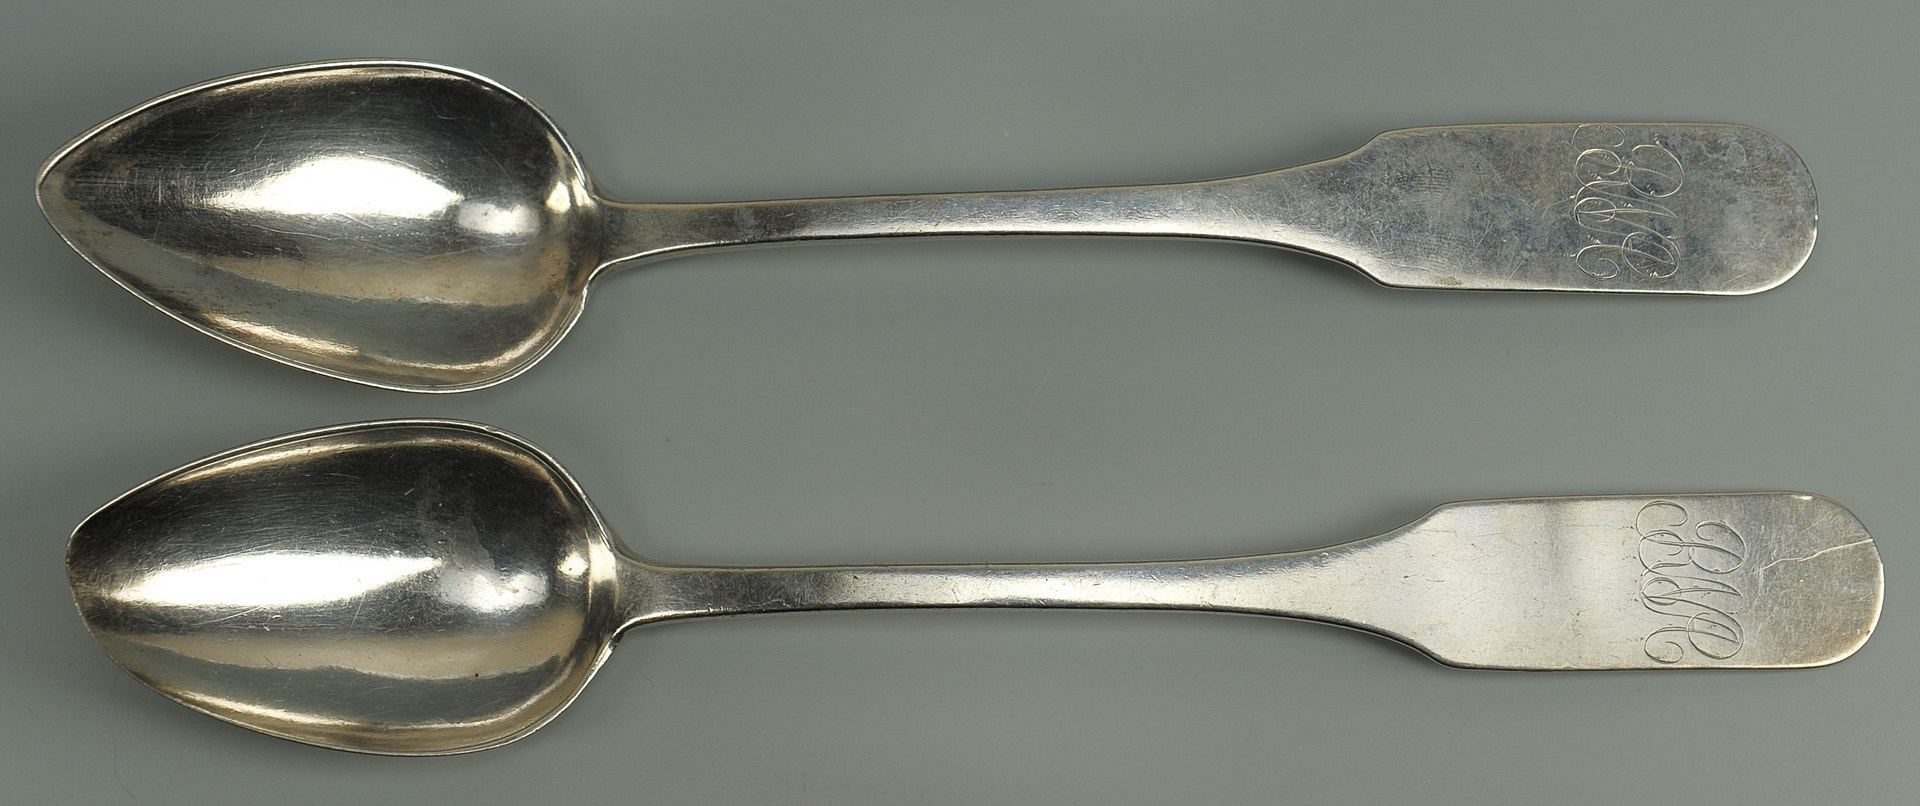 Lot 42: Two Nashville coin silver spoons, E. Raworth